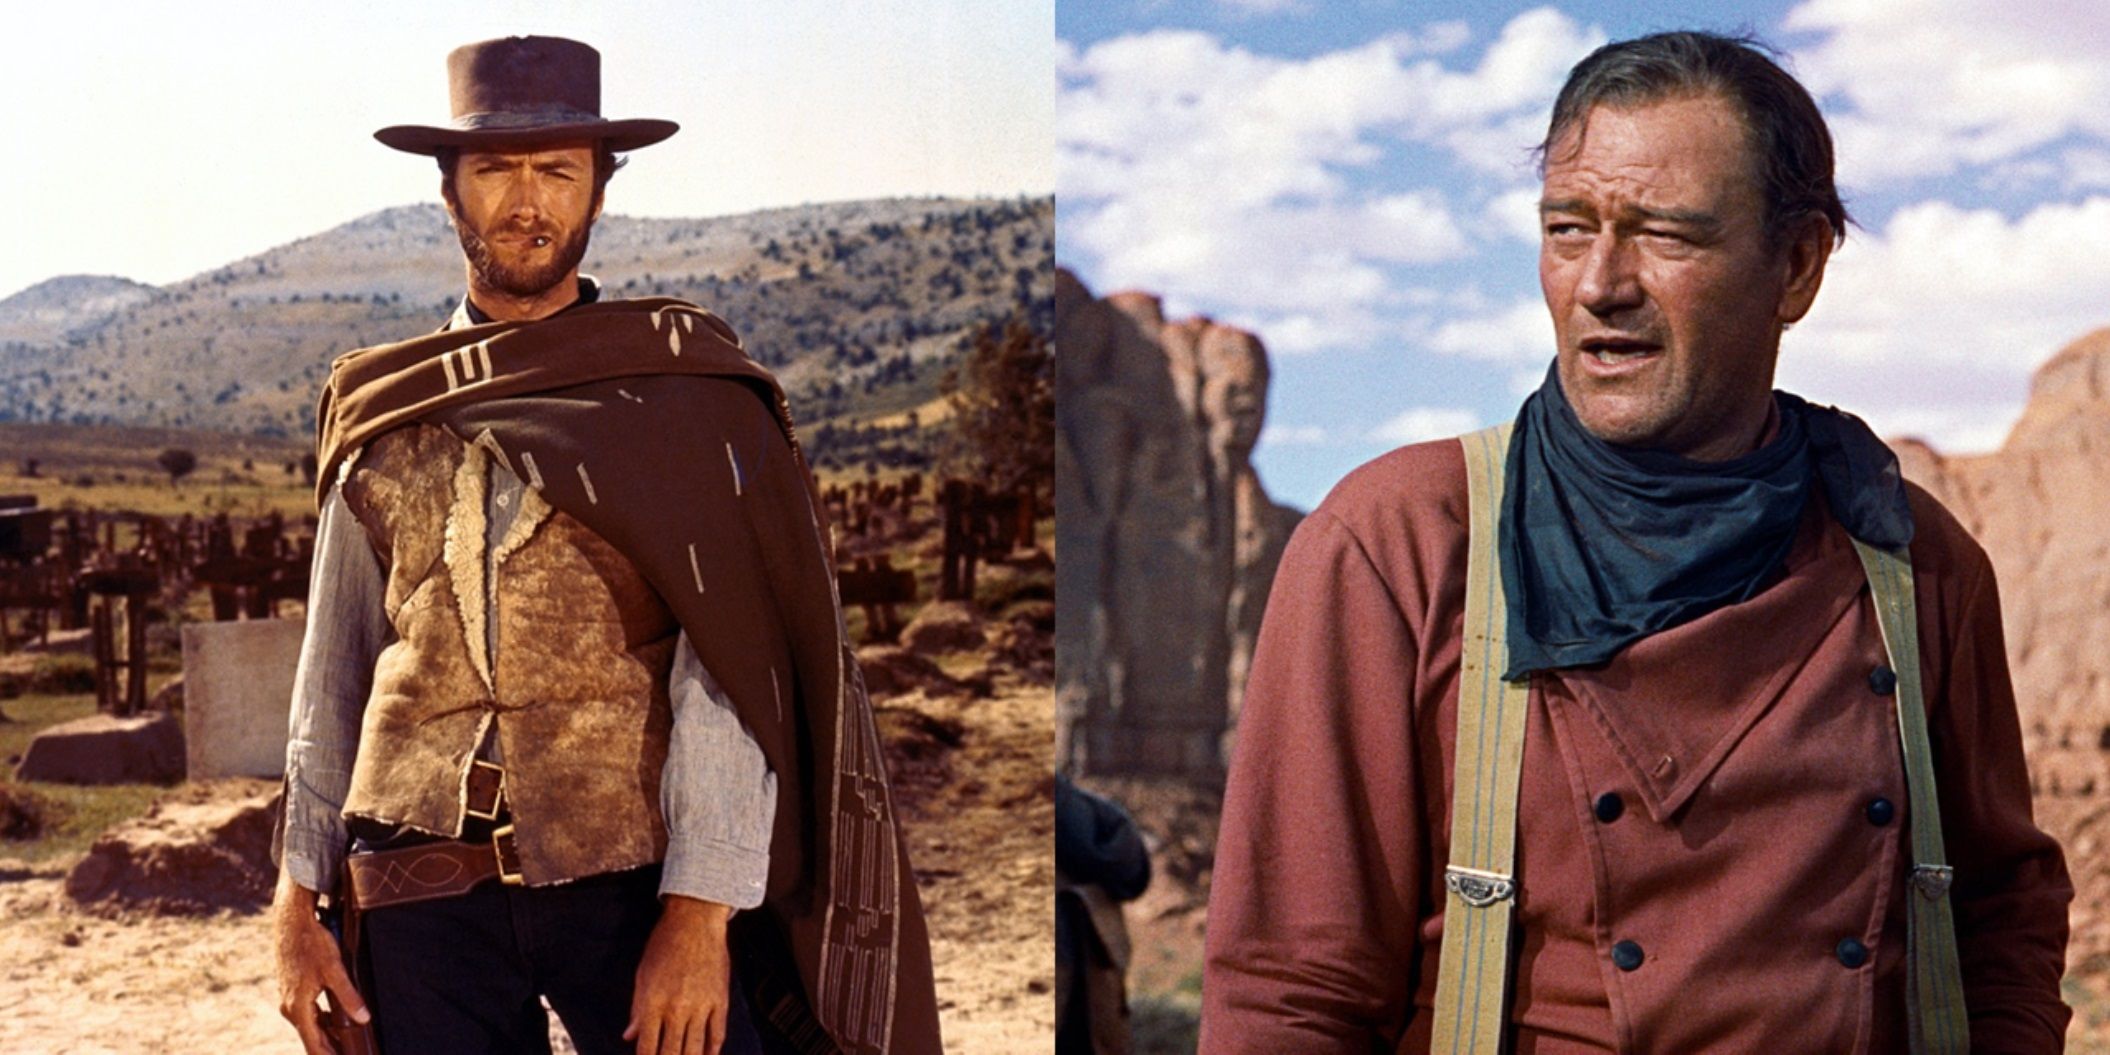 Split image of Clint Eastwood in The Good, the Bad, and the Ugly and John Wayne in The Searchers